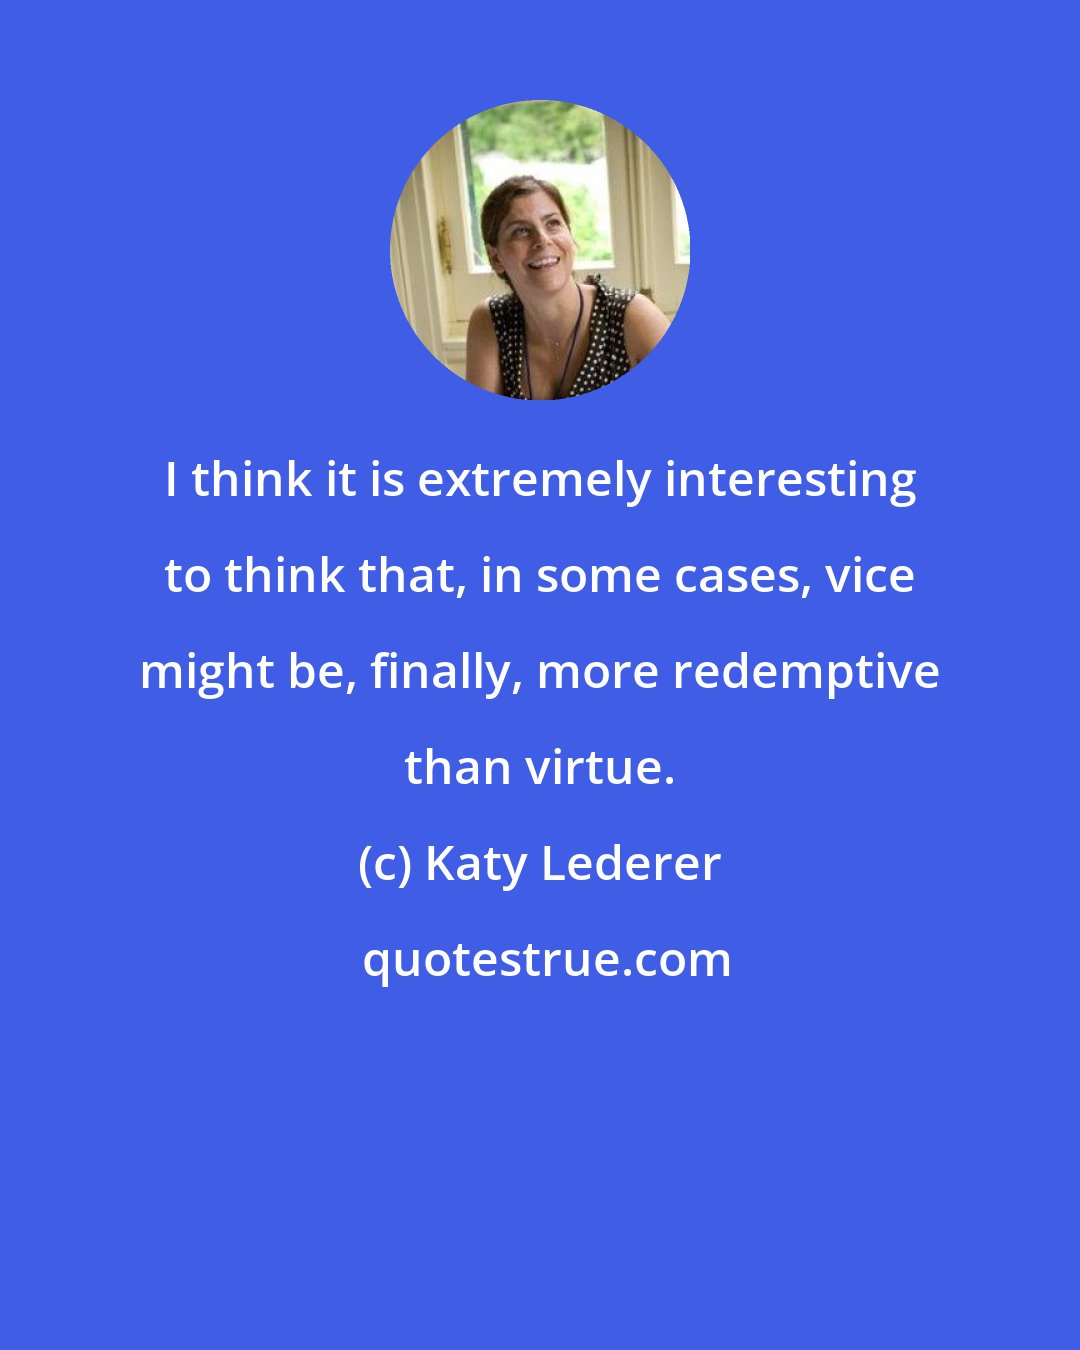 Katy Lederer: I think it is extremely interesting to think that, in some cases, vice might be, finally, more redemptive than virtue.